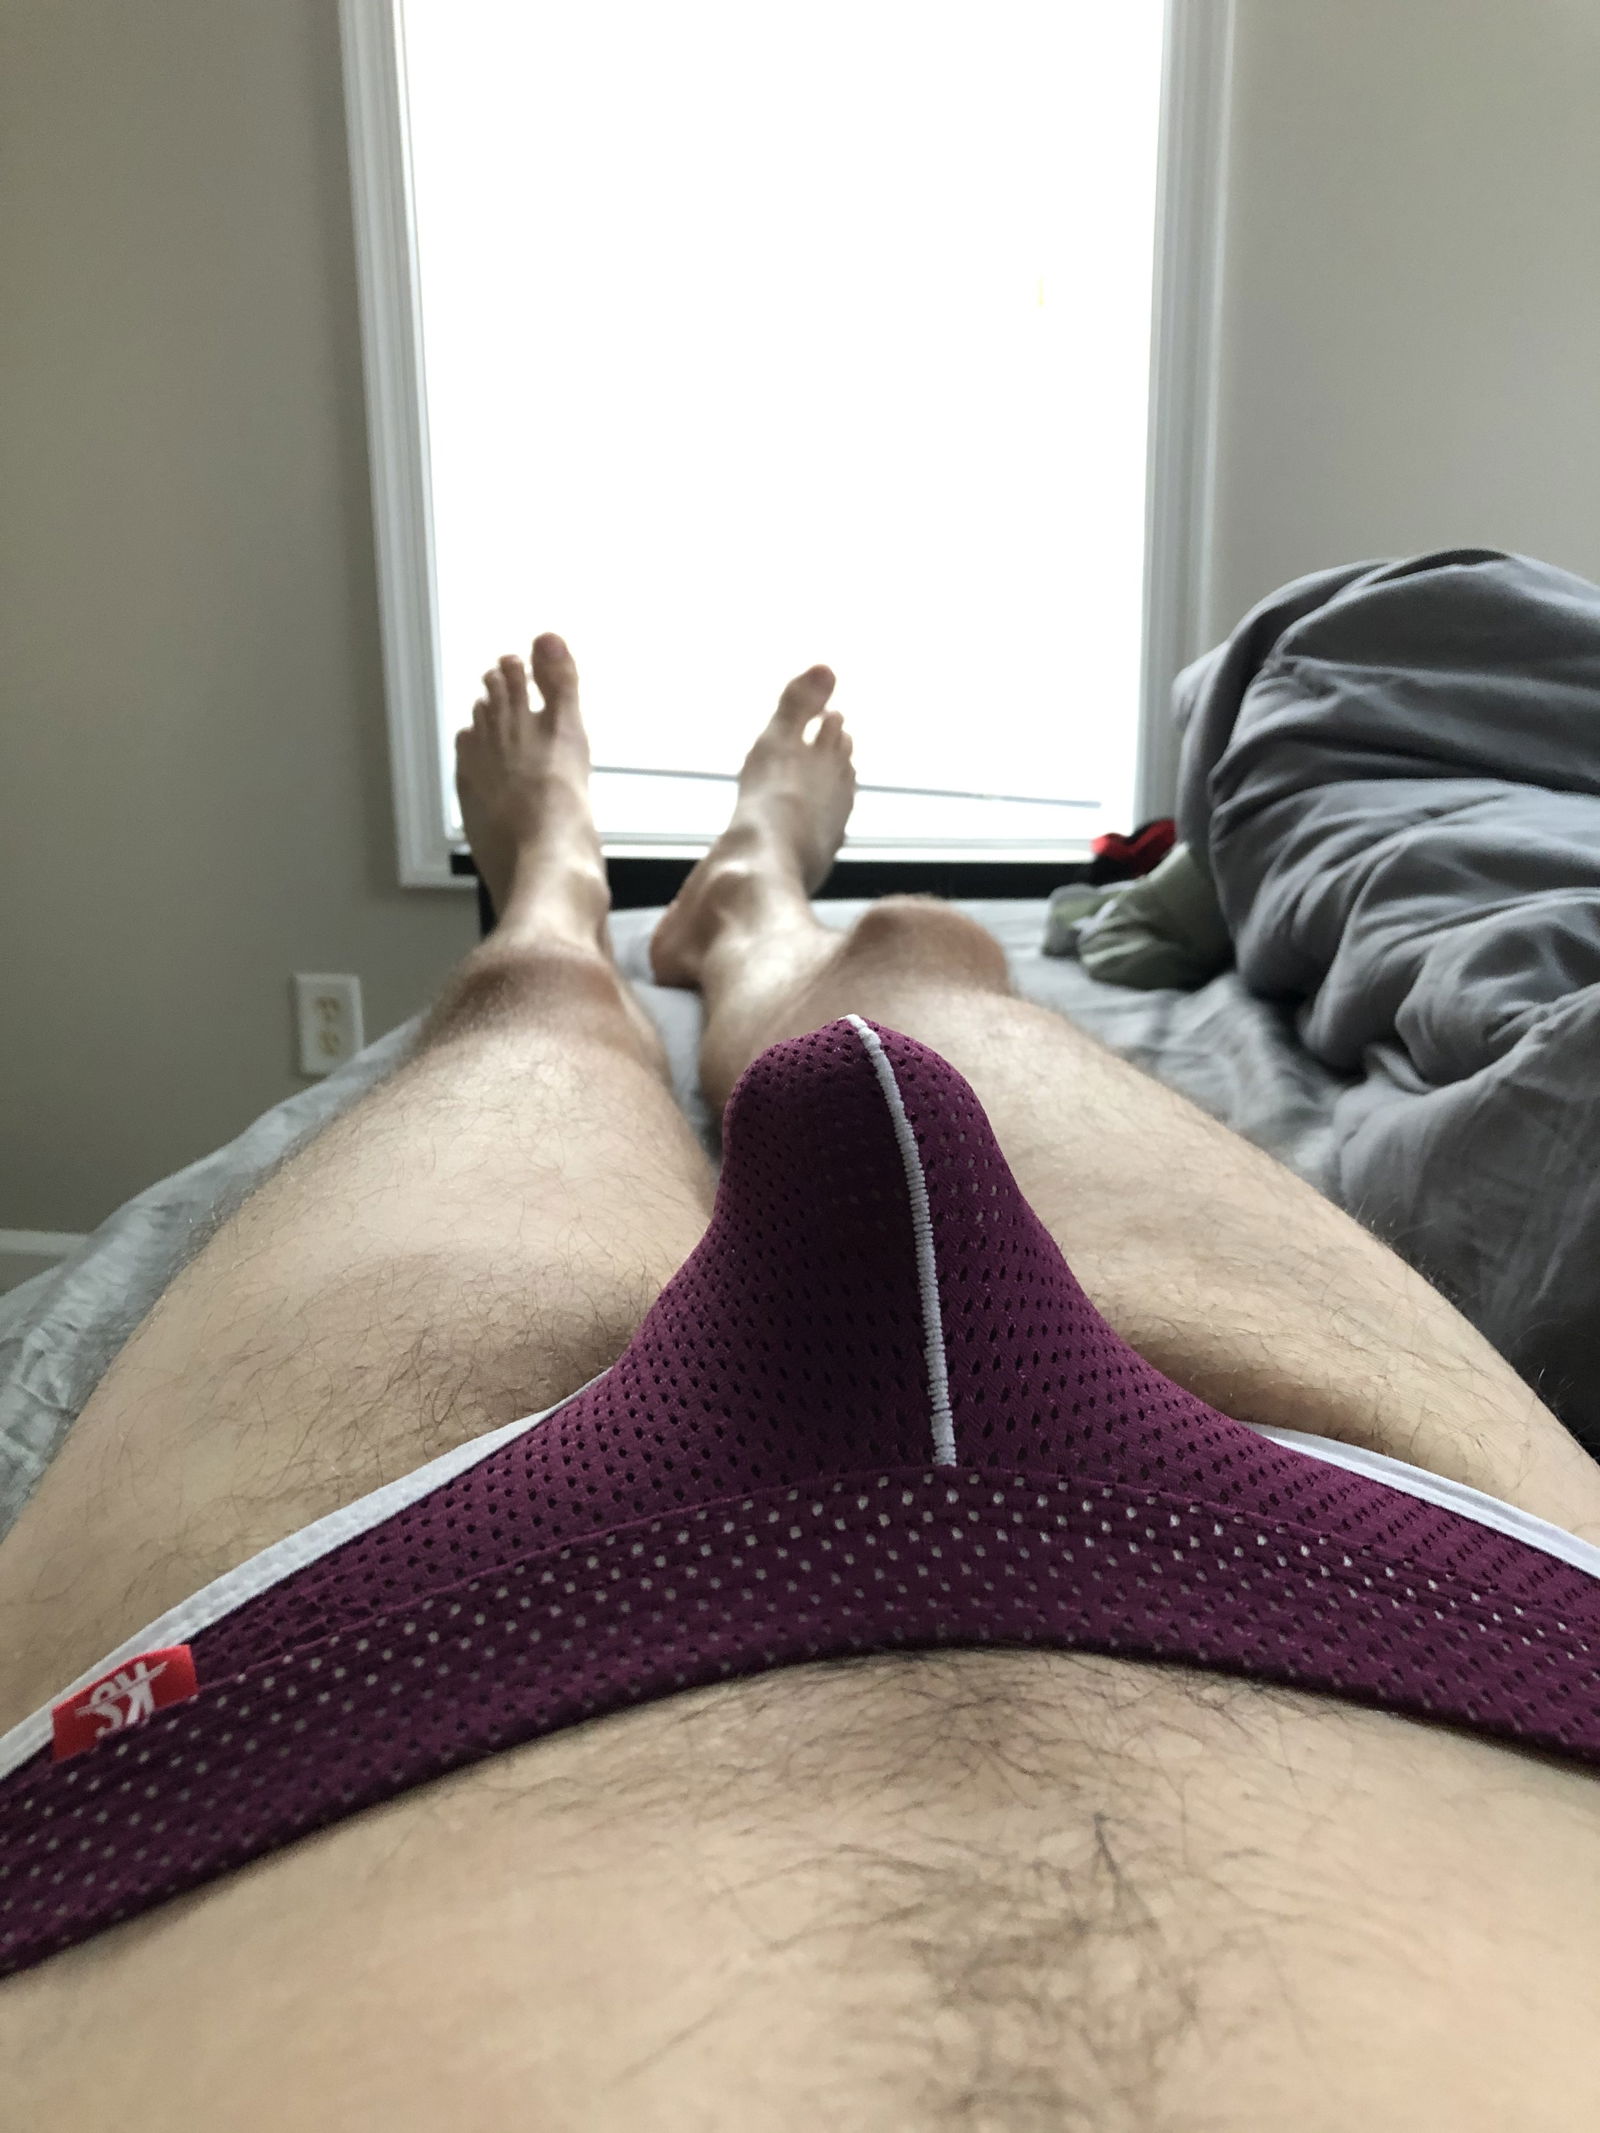 Photo by CuddleFkkr with the username @CuddleFkkr,  July 13, 2020 at 10:13 PM. The post is about the topic Male feet, socks and jocks and the text says 'trying out my mesh jocks from Arjen Kroos'